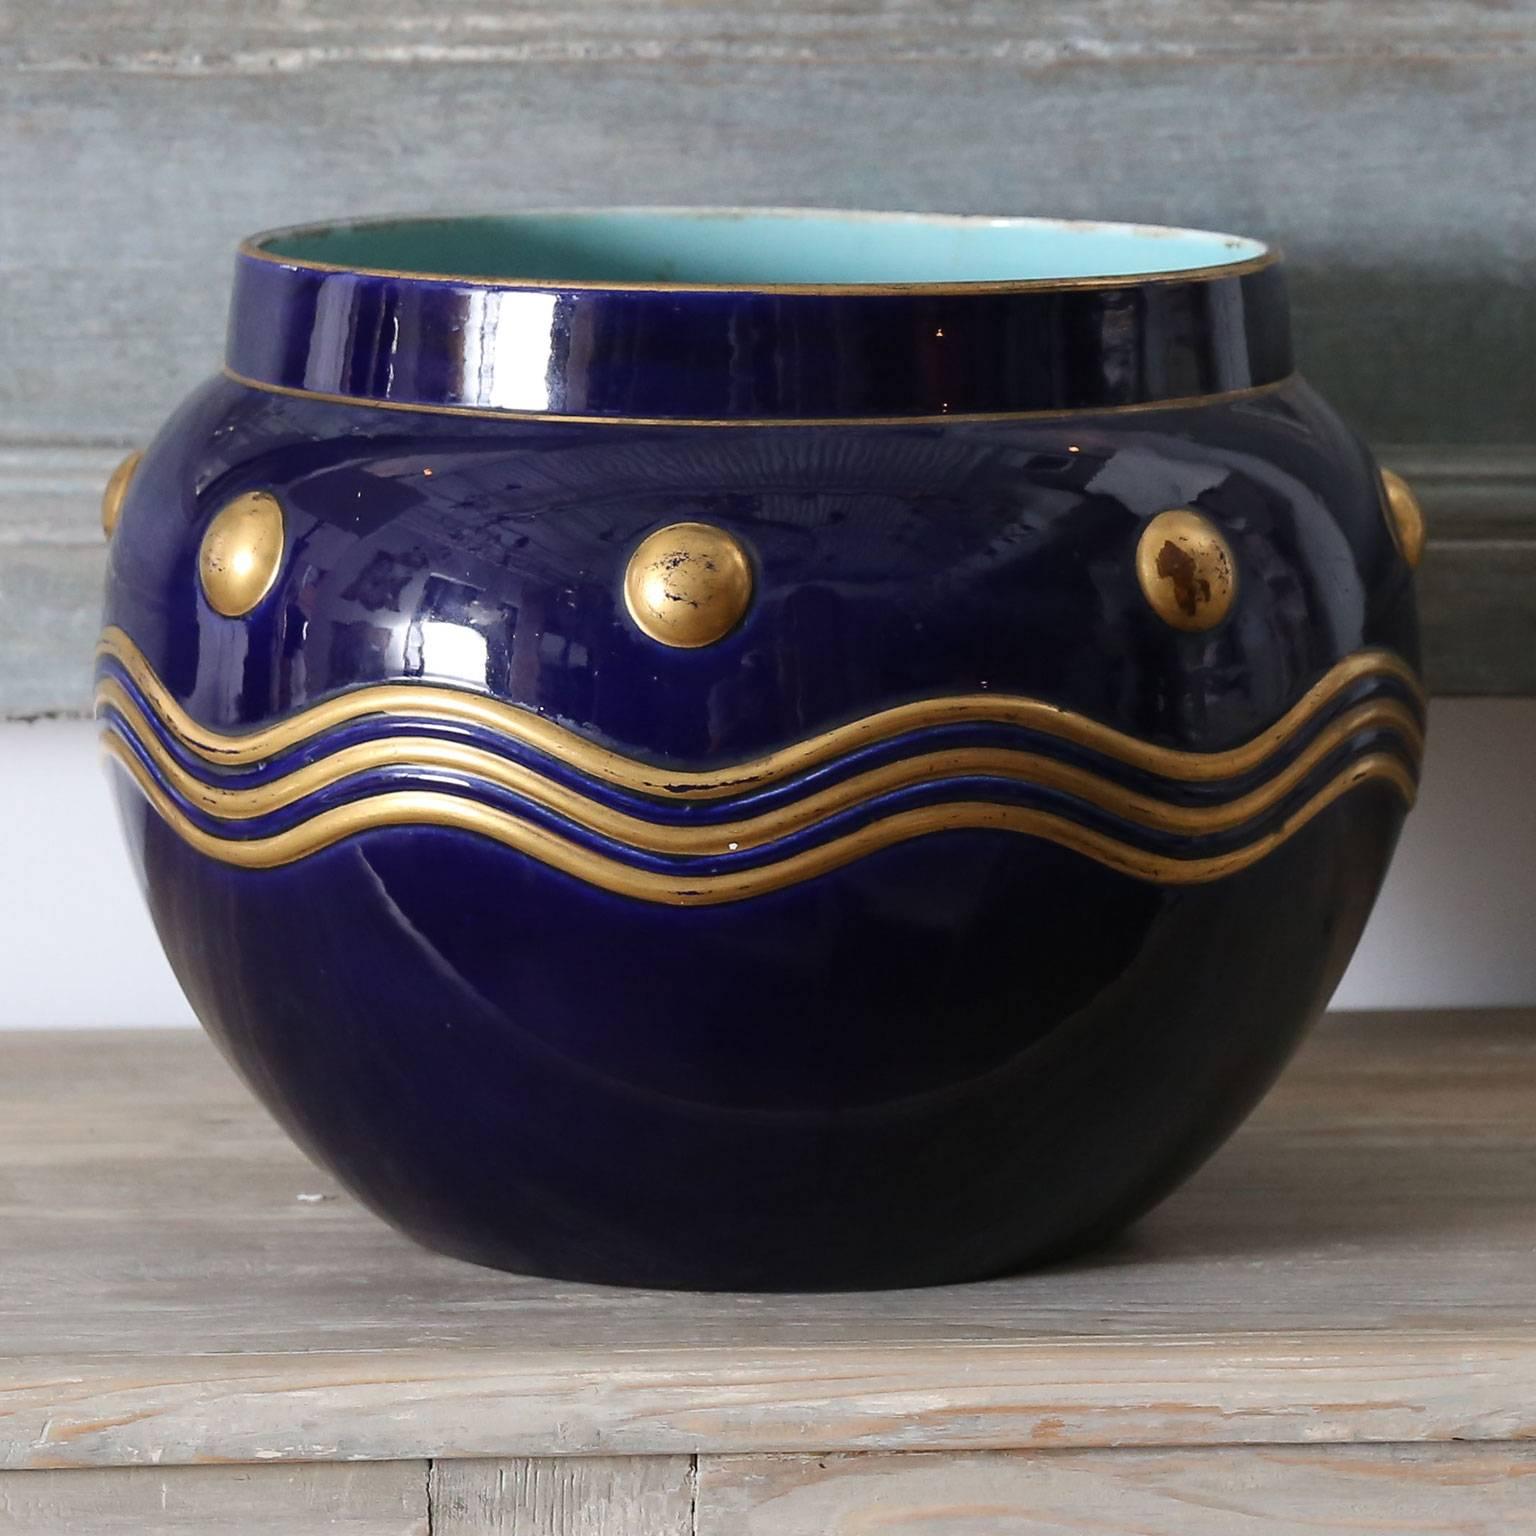 French faience cachepot by Sarreguemines - Digoin - Vitry-le-François (formerly Utzschneider & Cie of Sarreguemines, France). Cobalt blue surface adorned with raised gilt decoration. Interior and bottom surfaces of cachepot are finished in a soft,